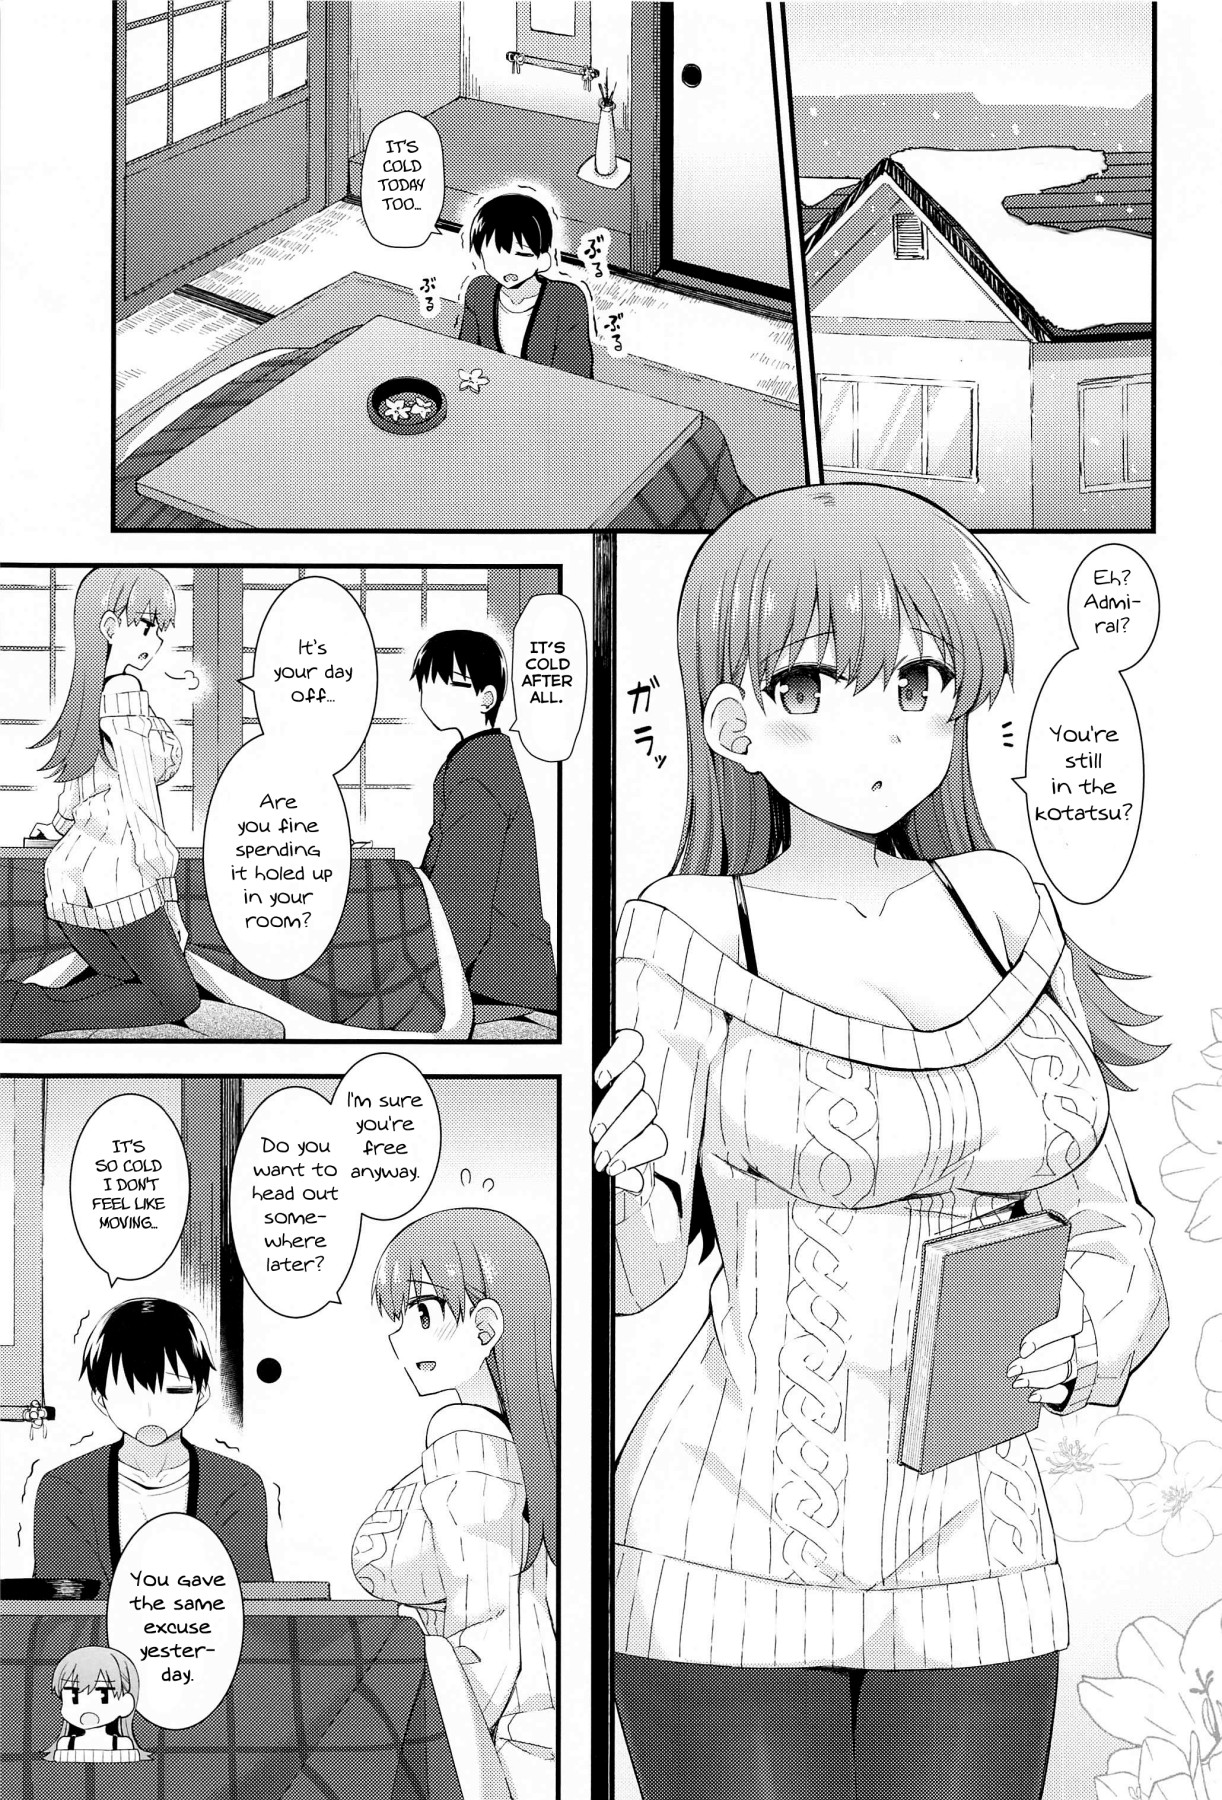 Hentai Manga Comic-Spending a Winter Evneing Together With Ooi-Read-2